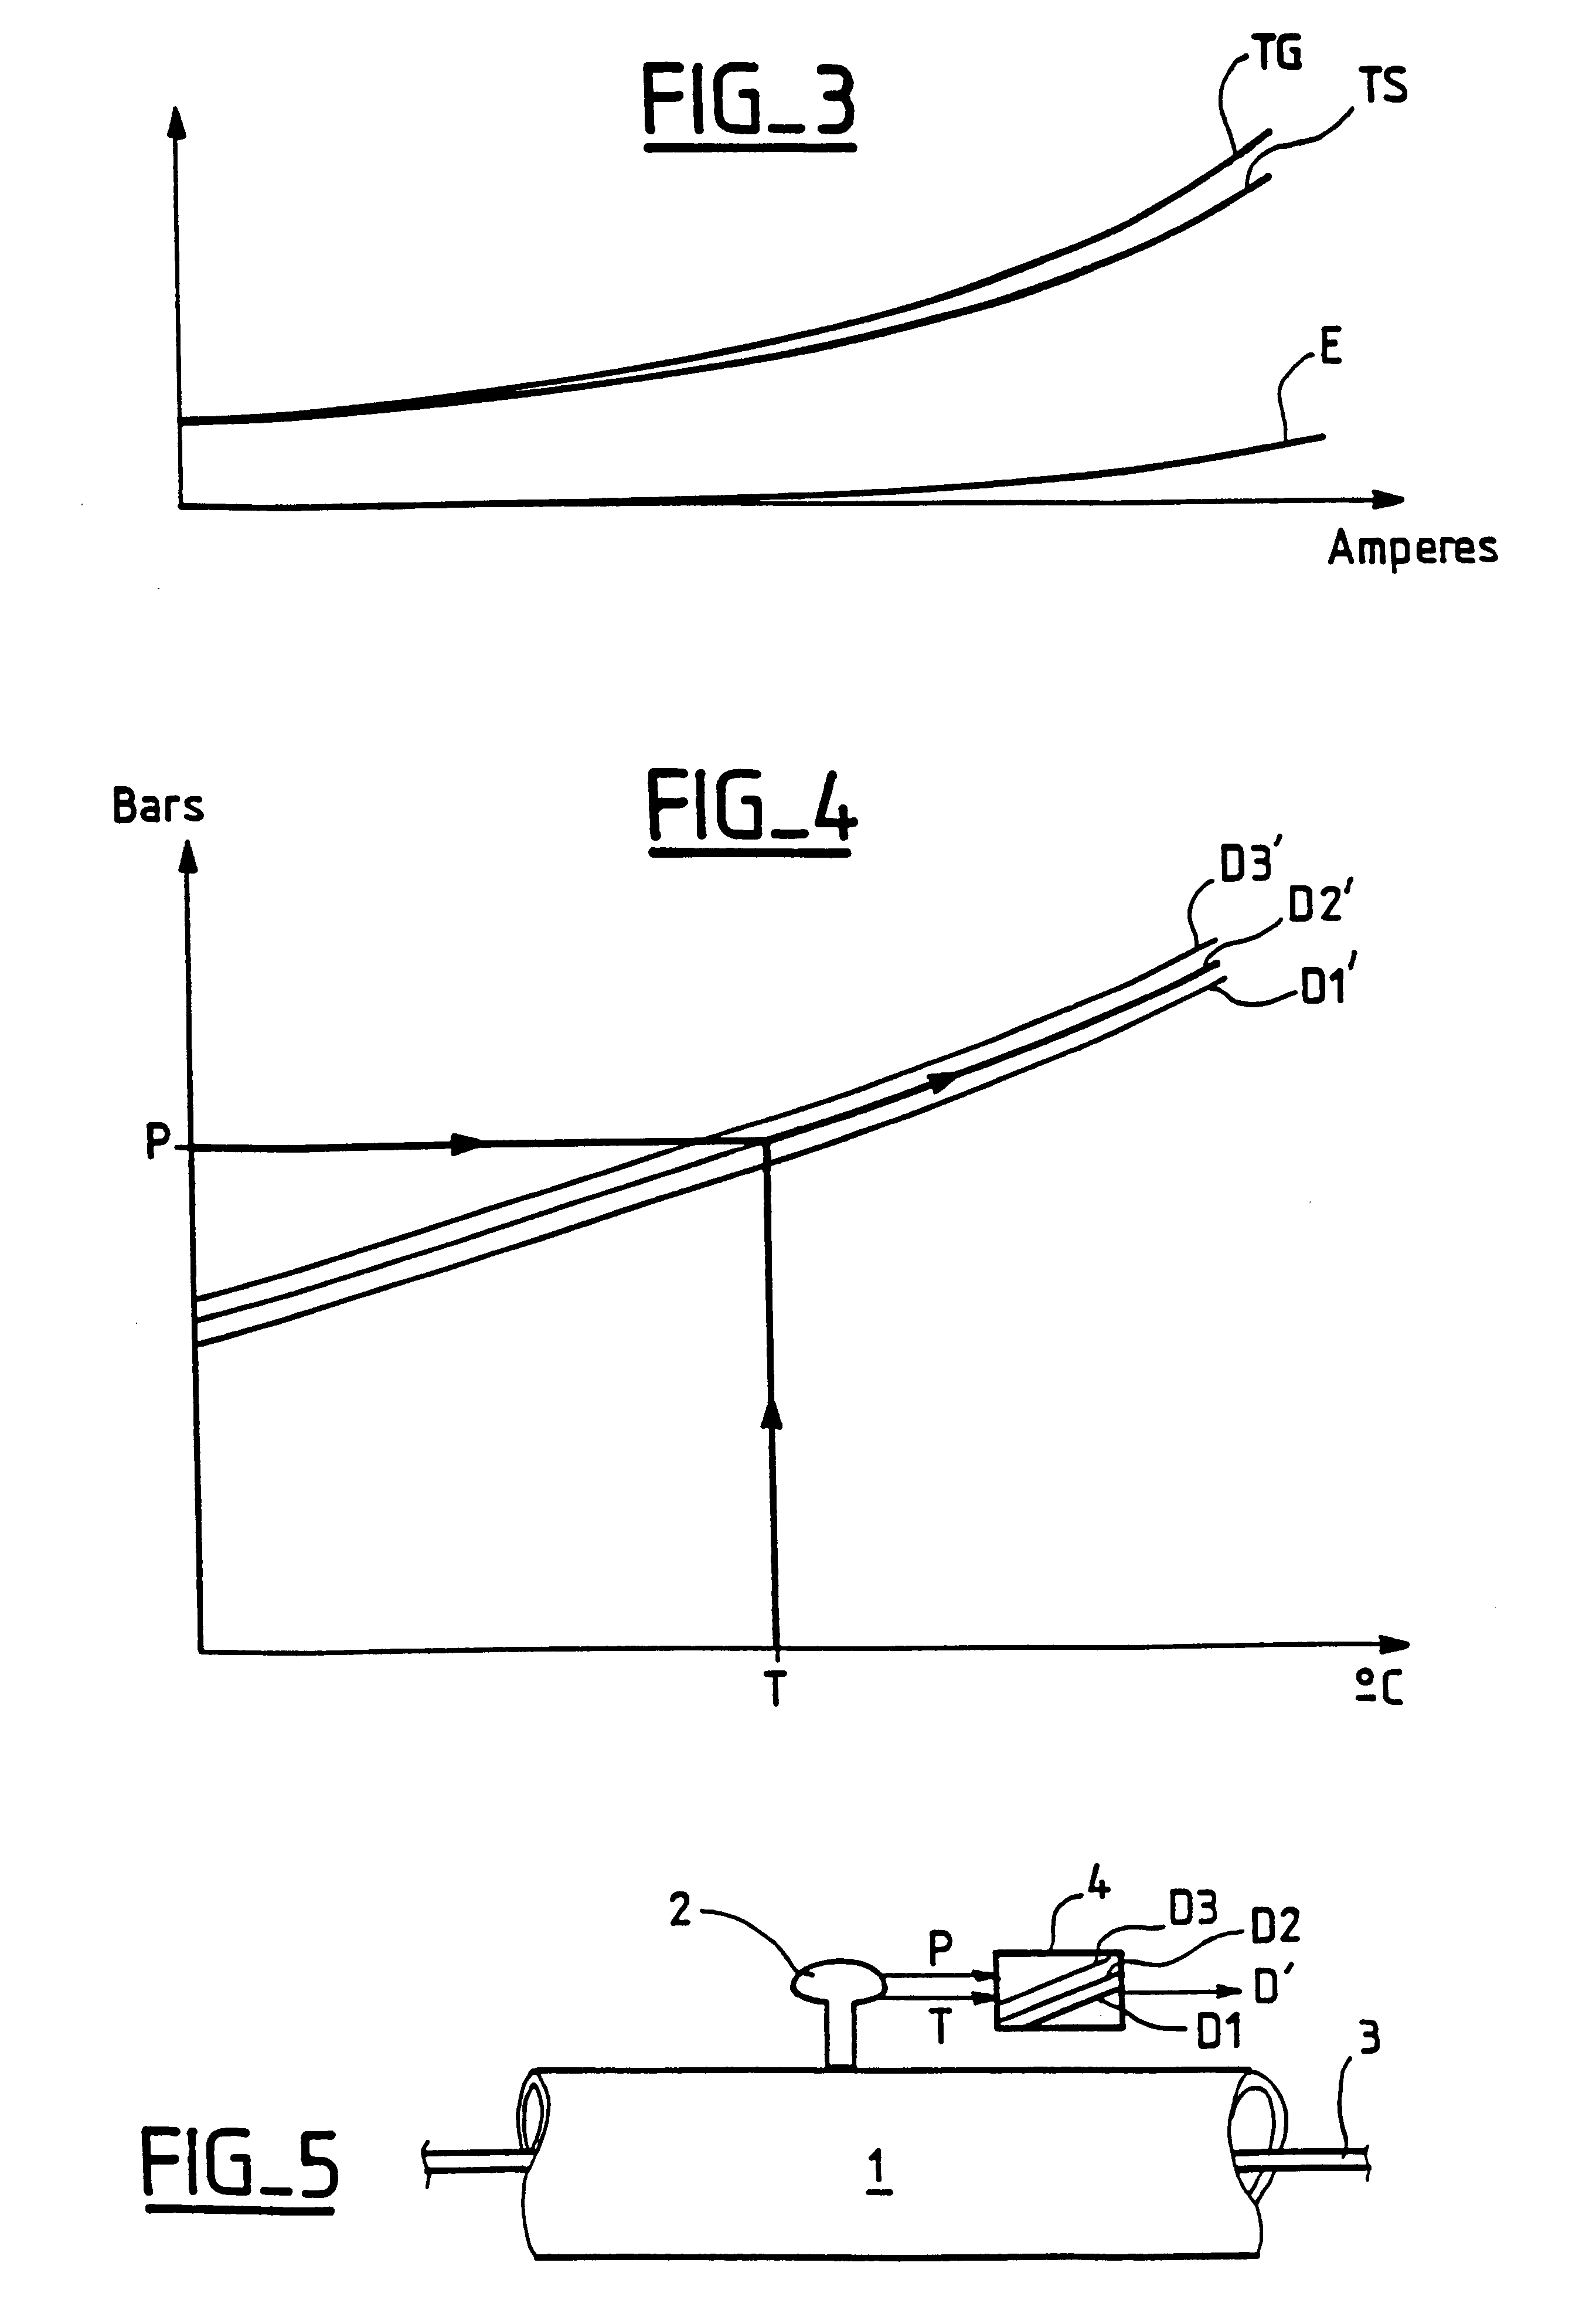 Method of measuring the density of a dielectric gas in a buried metal-clad line